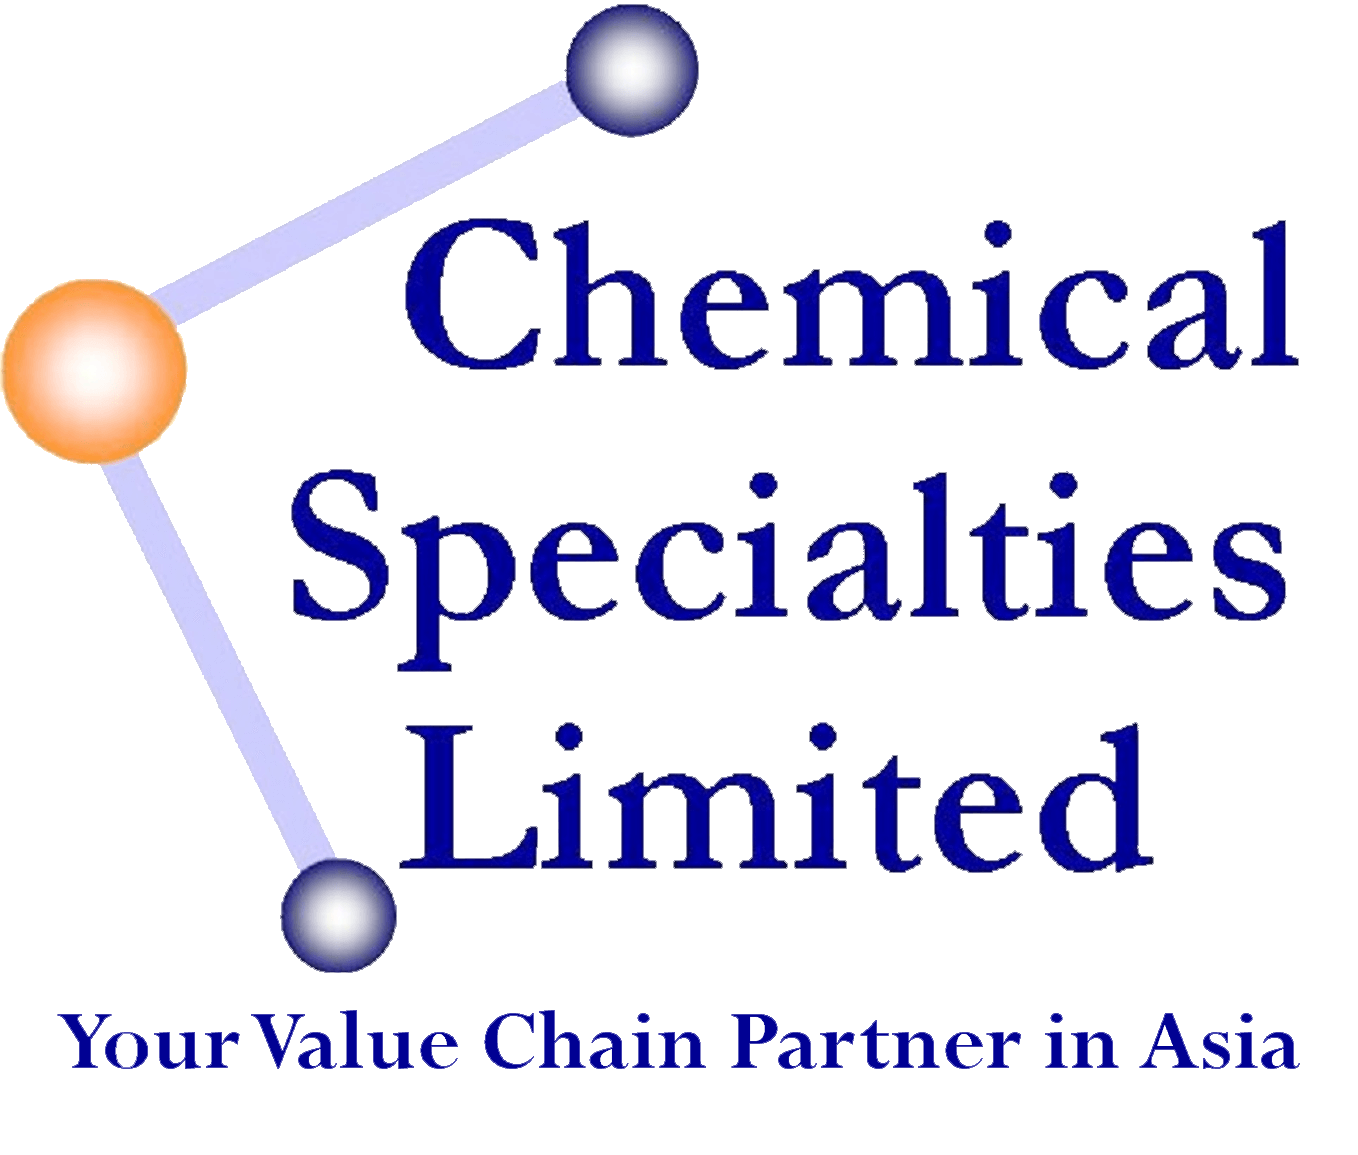 Chemical Specialties Limited